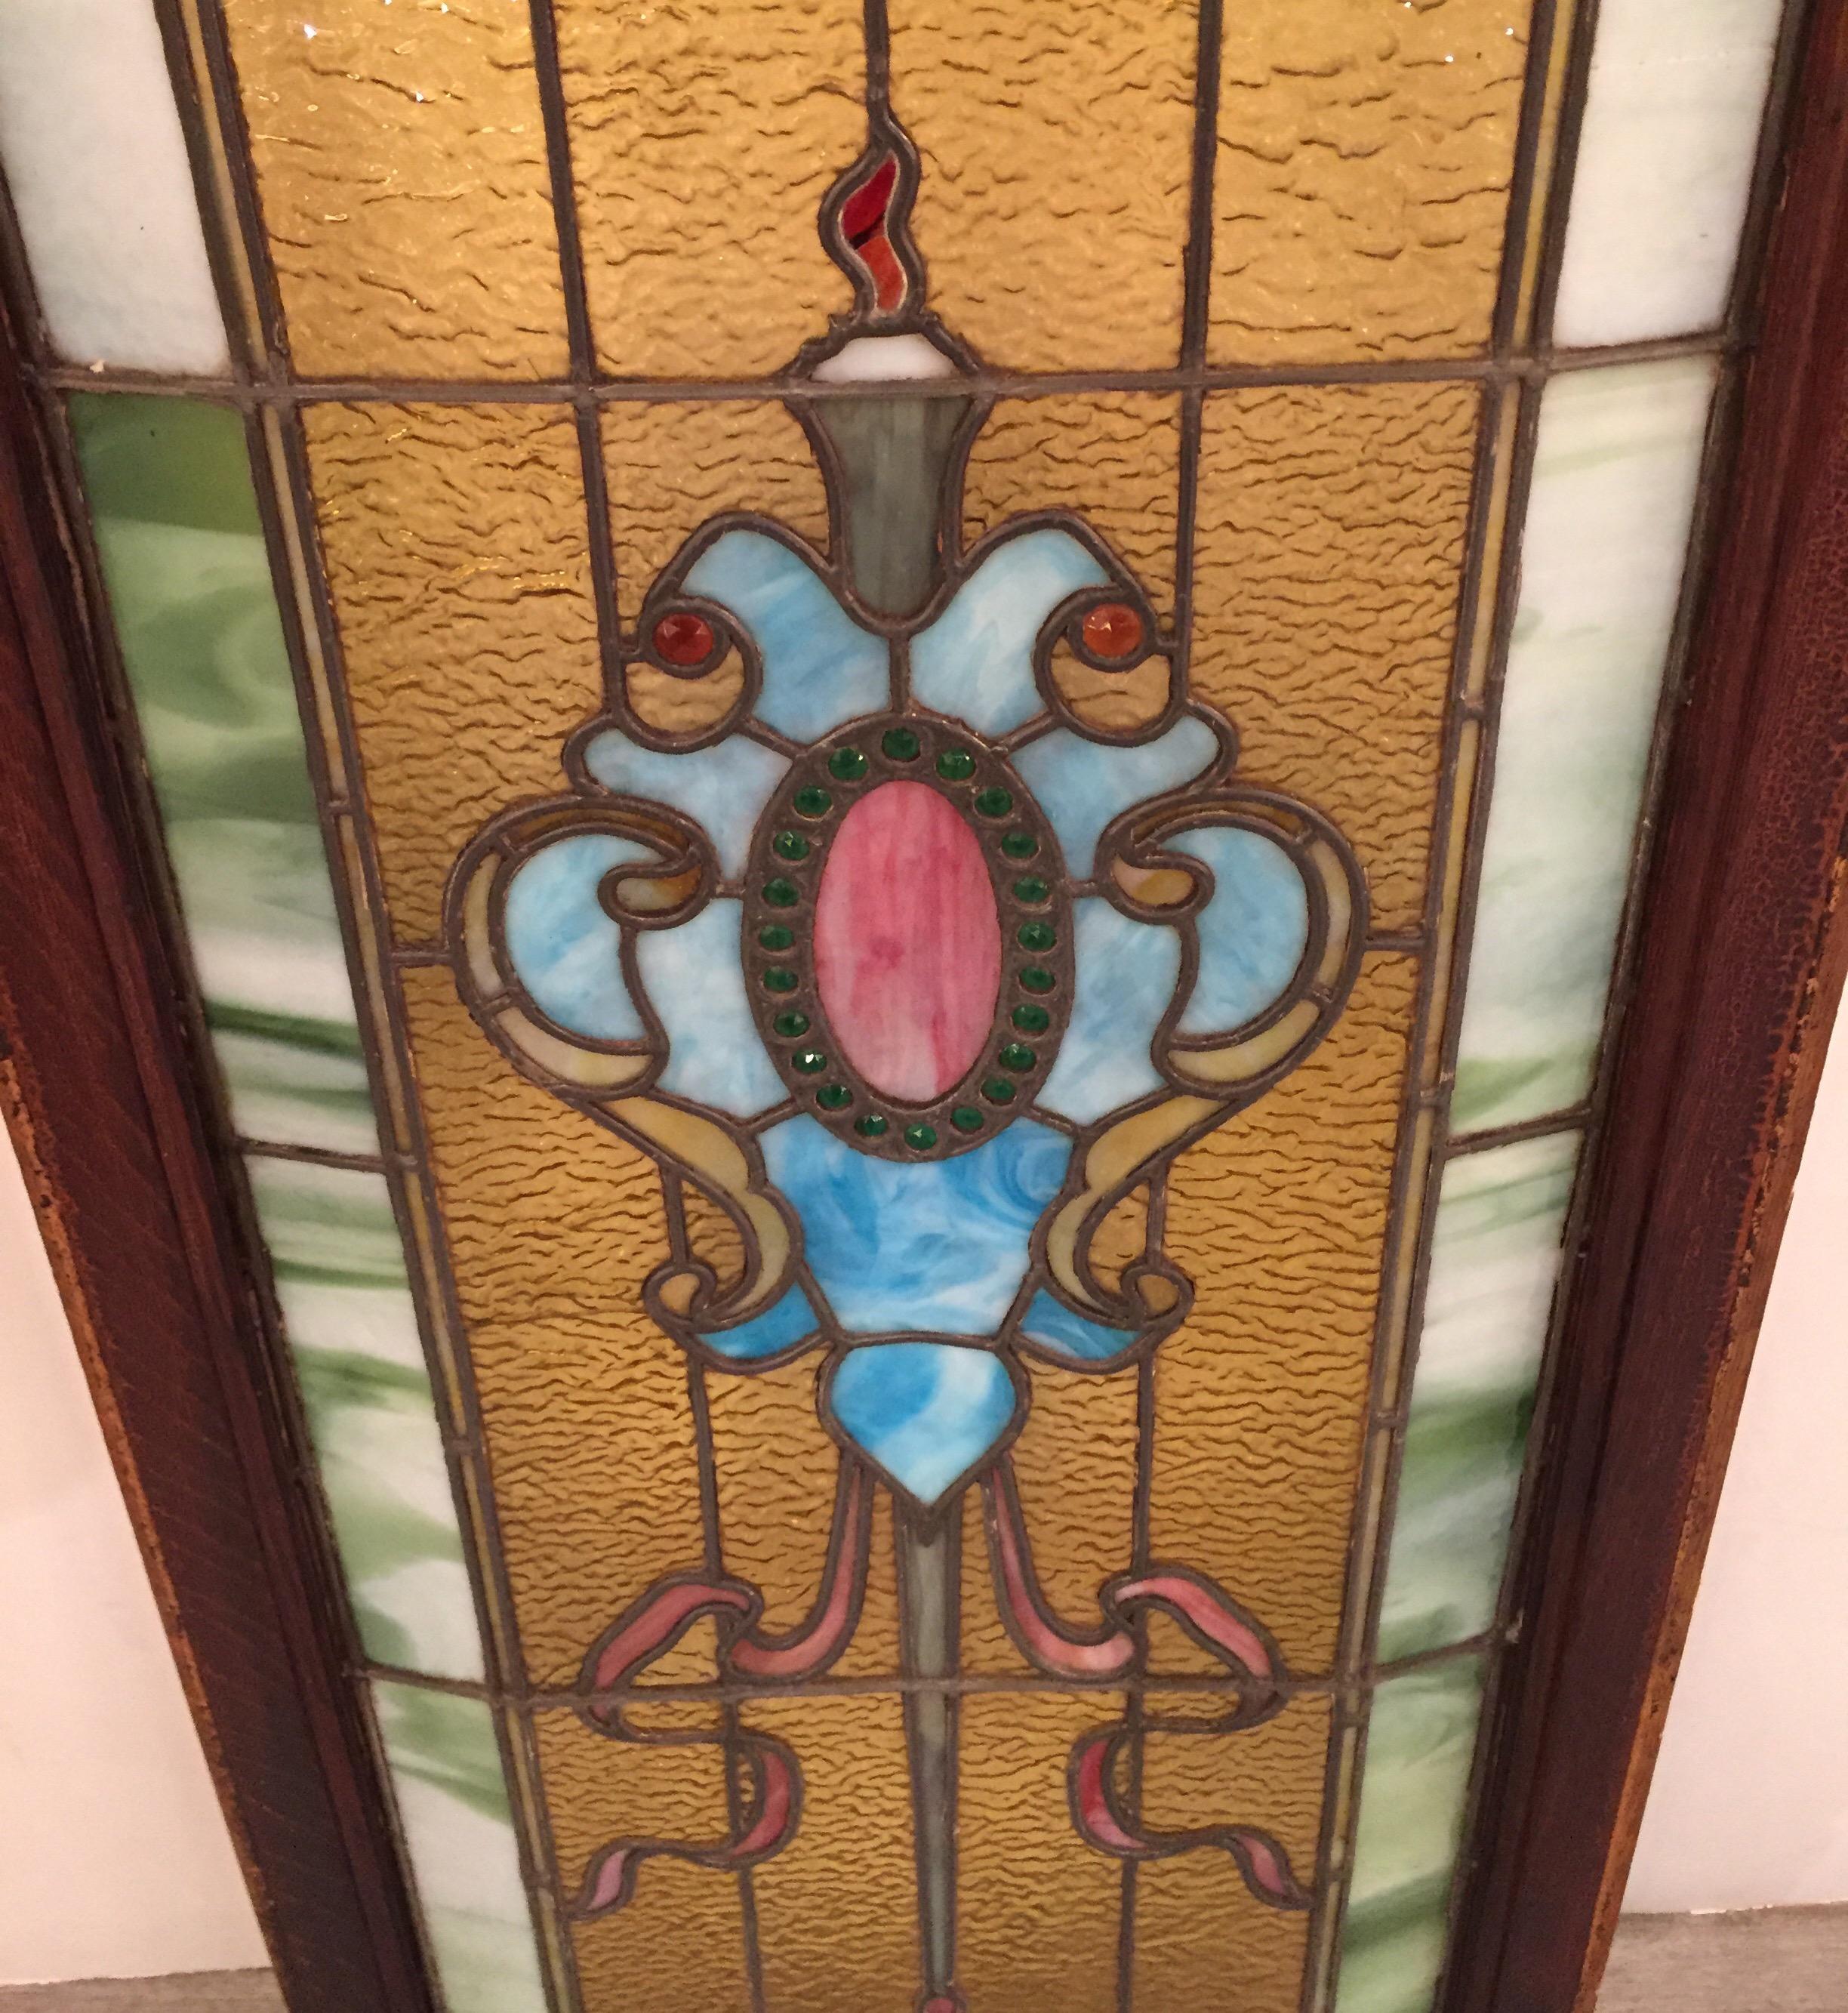 Original 19th century stained glass panel with wood frame. The shield pattern centered flanked by ribbons with an amber background. The outside edge with a green marbleized border. One small panel of glass with a slight crack. The entire stained